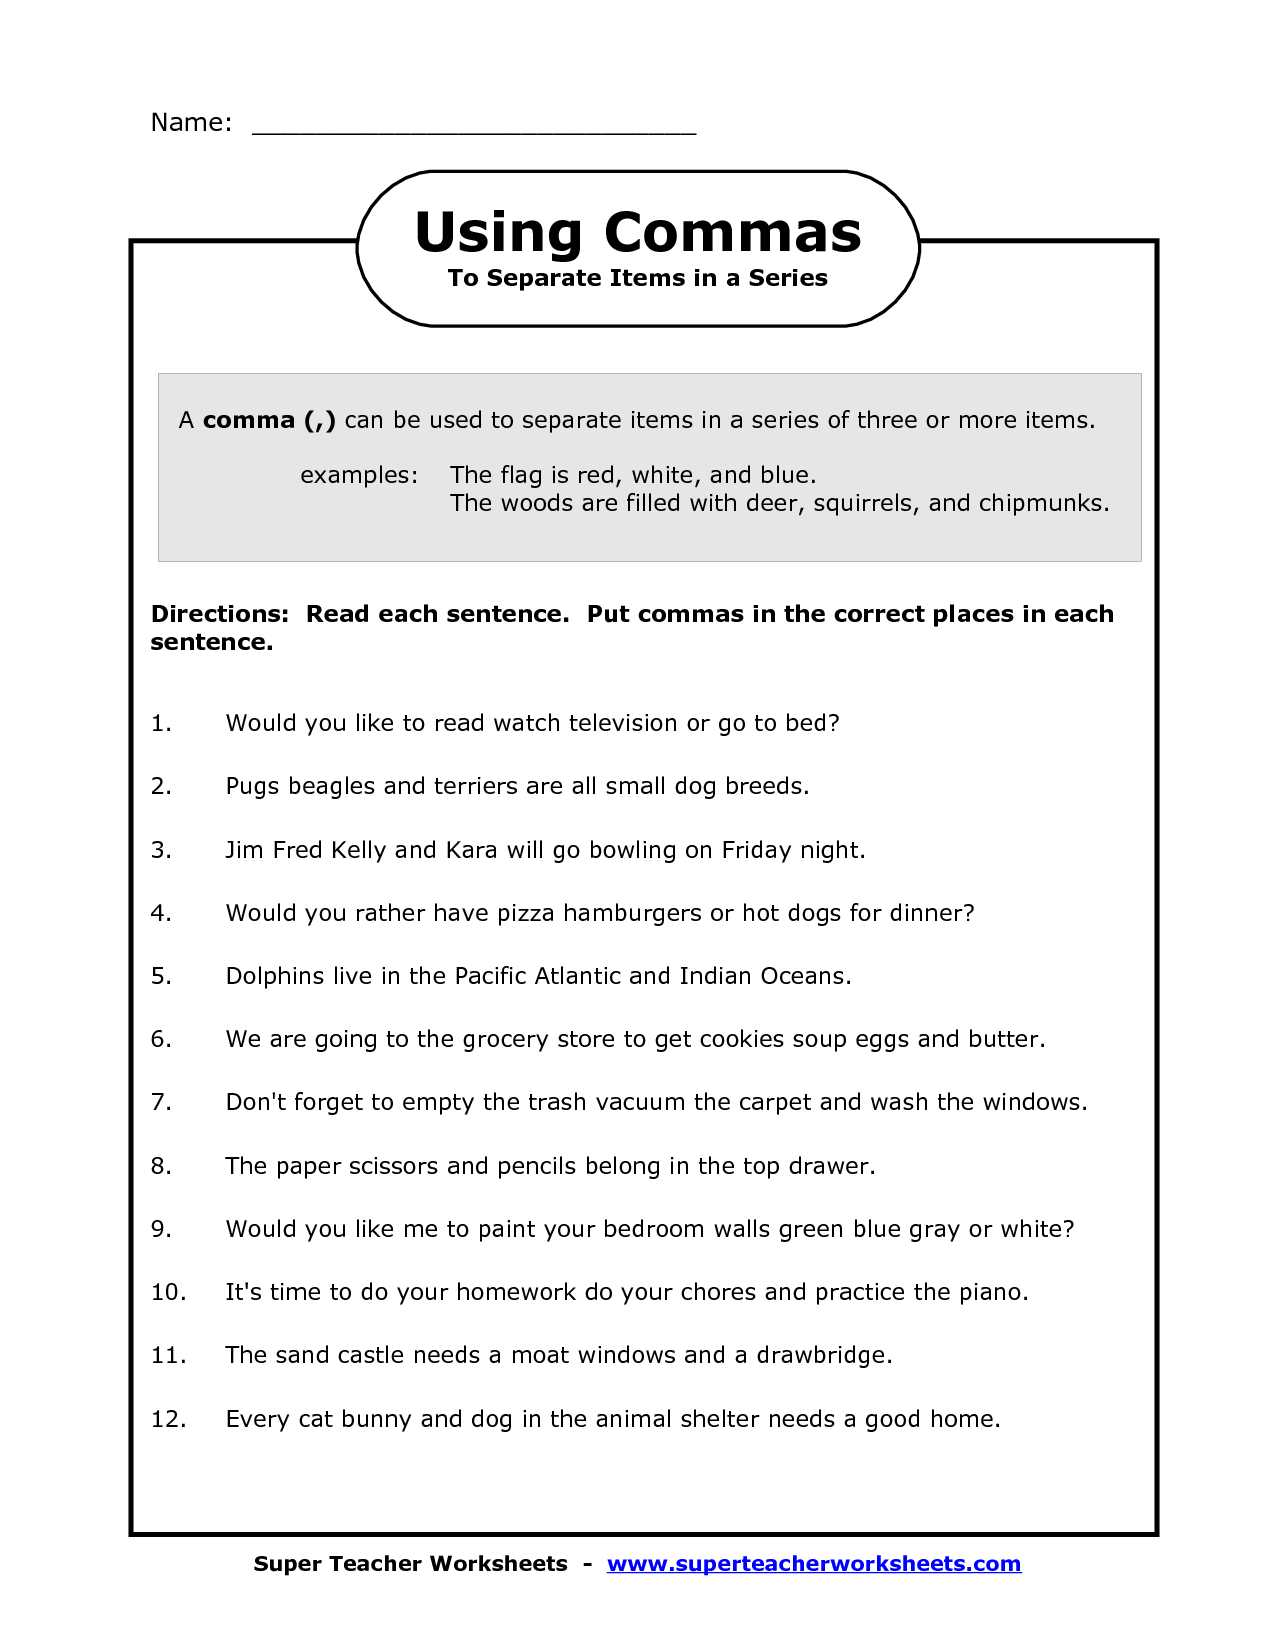 Simple Subject and Predicate Worksheets and Ma In A Series Worksheets Image